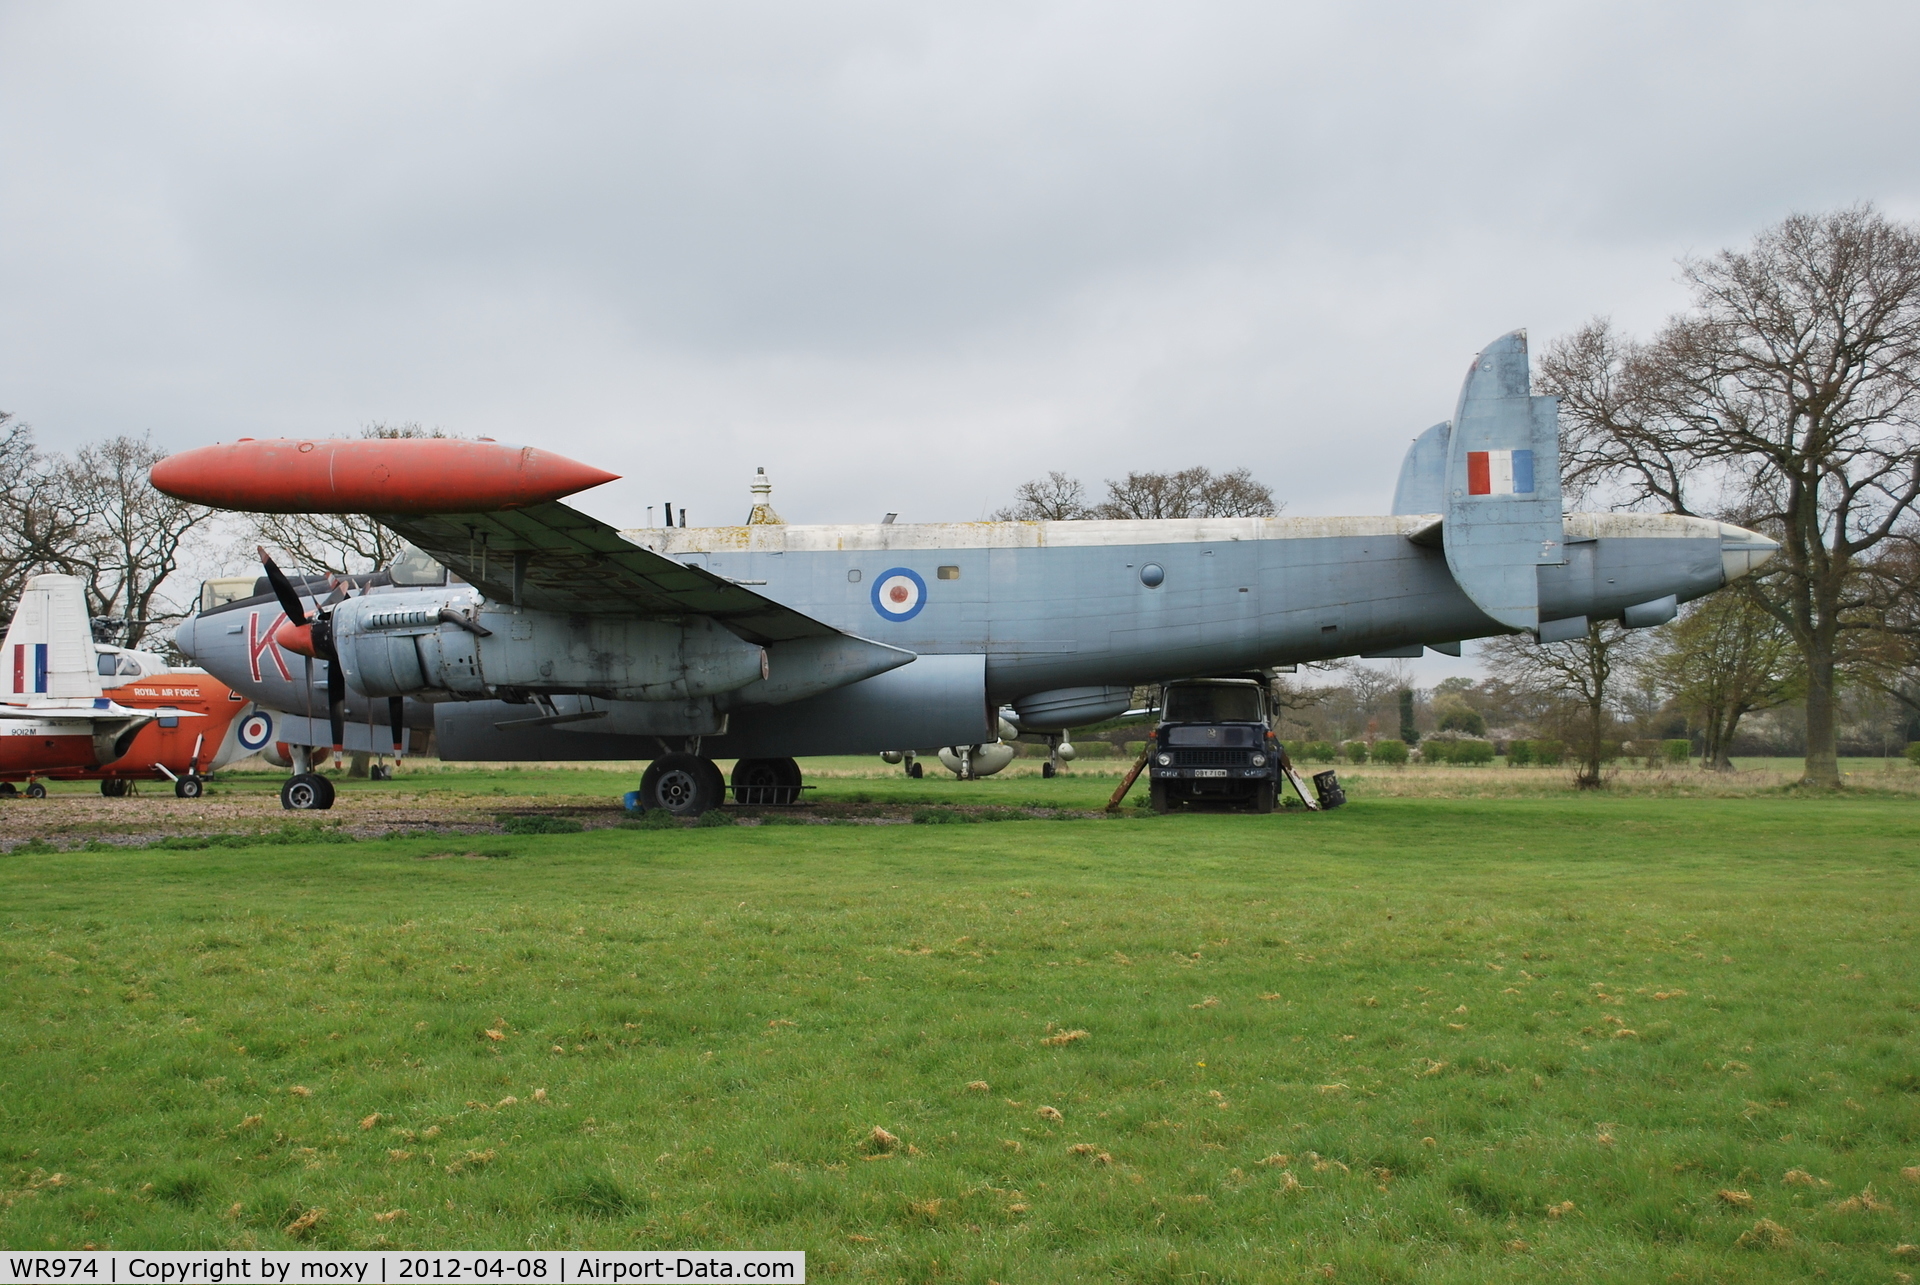 WR974, 1957 Avro 716 Shackleton MR.3/3 C/N Not found WR974, Avro Shackleton MR.3 at the Gatwick Aviation Museum